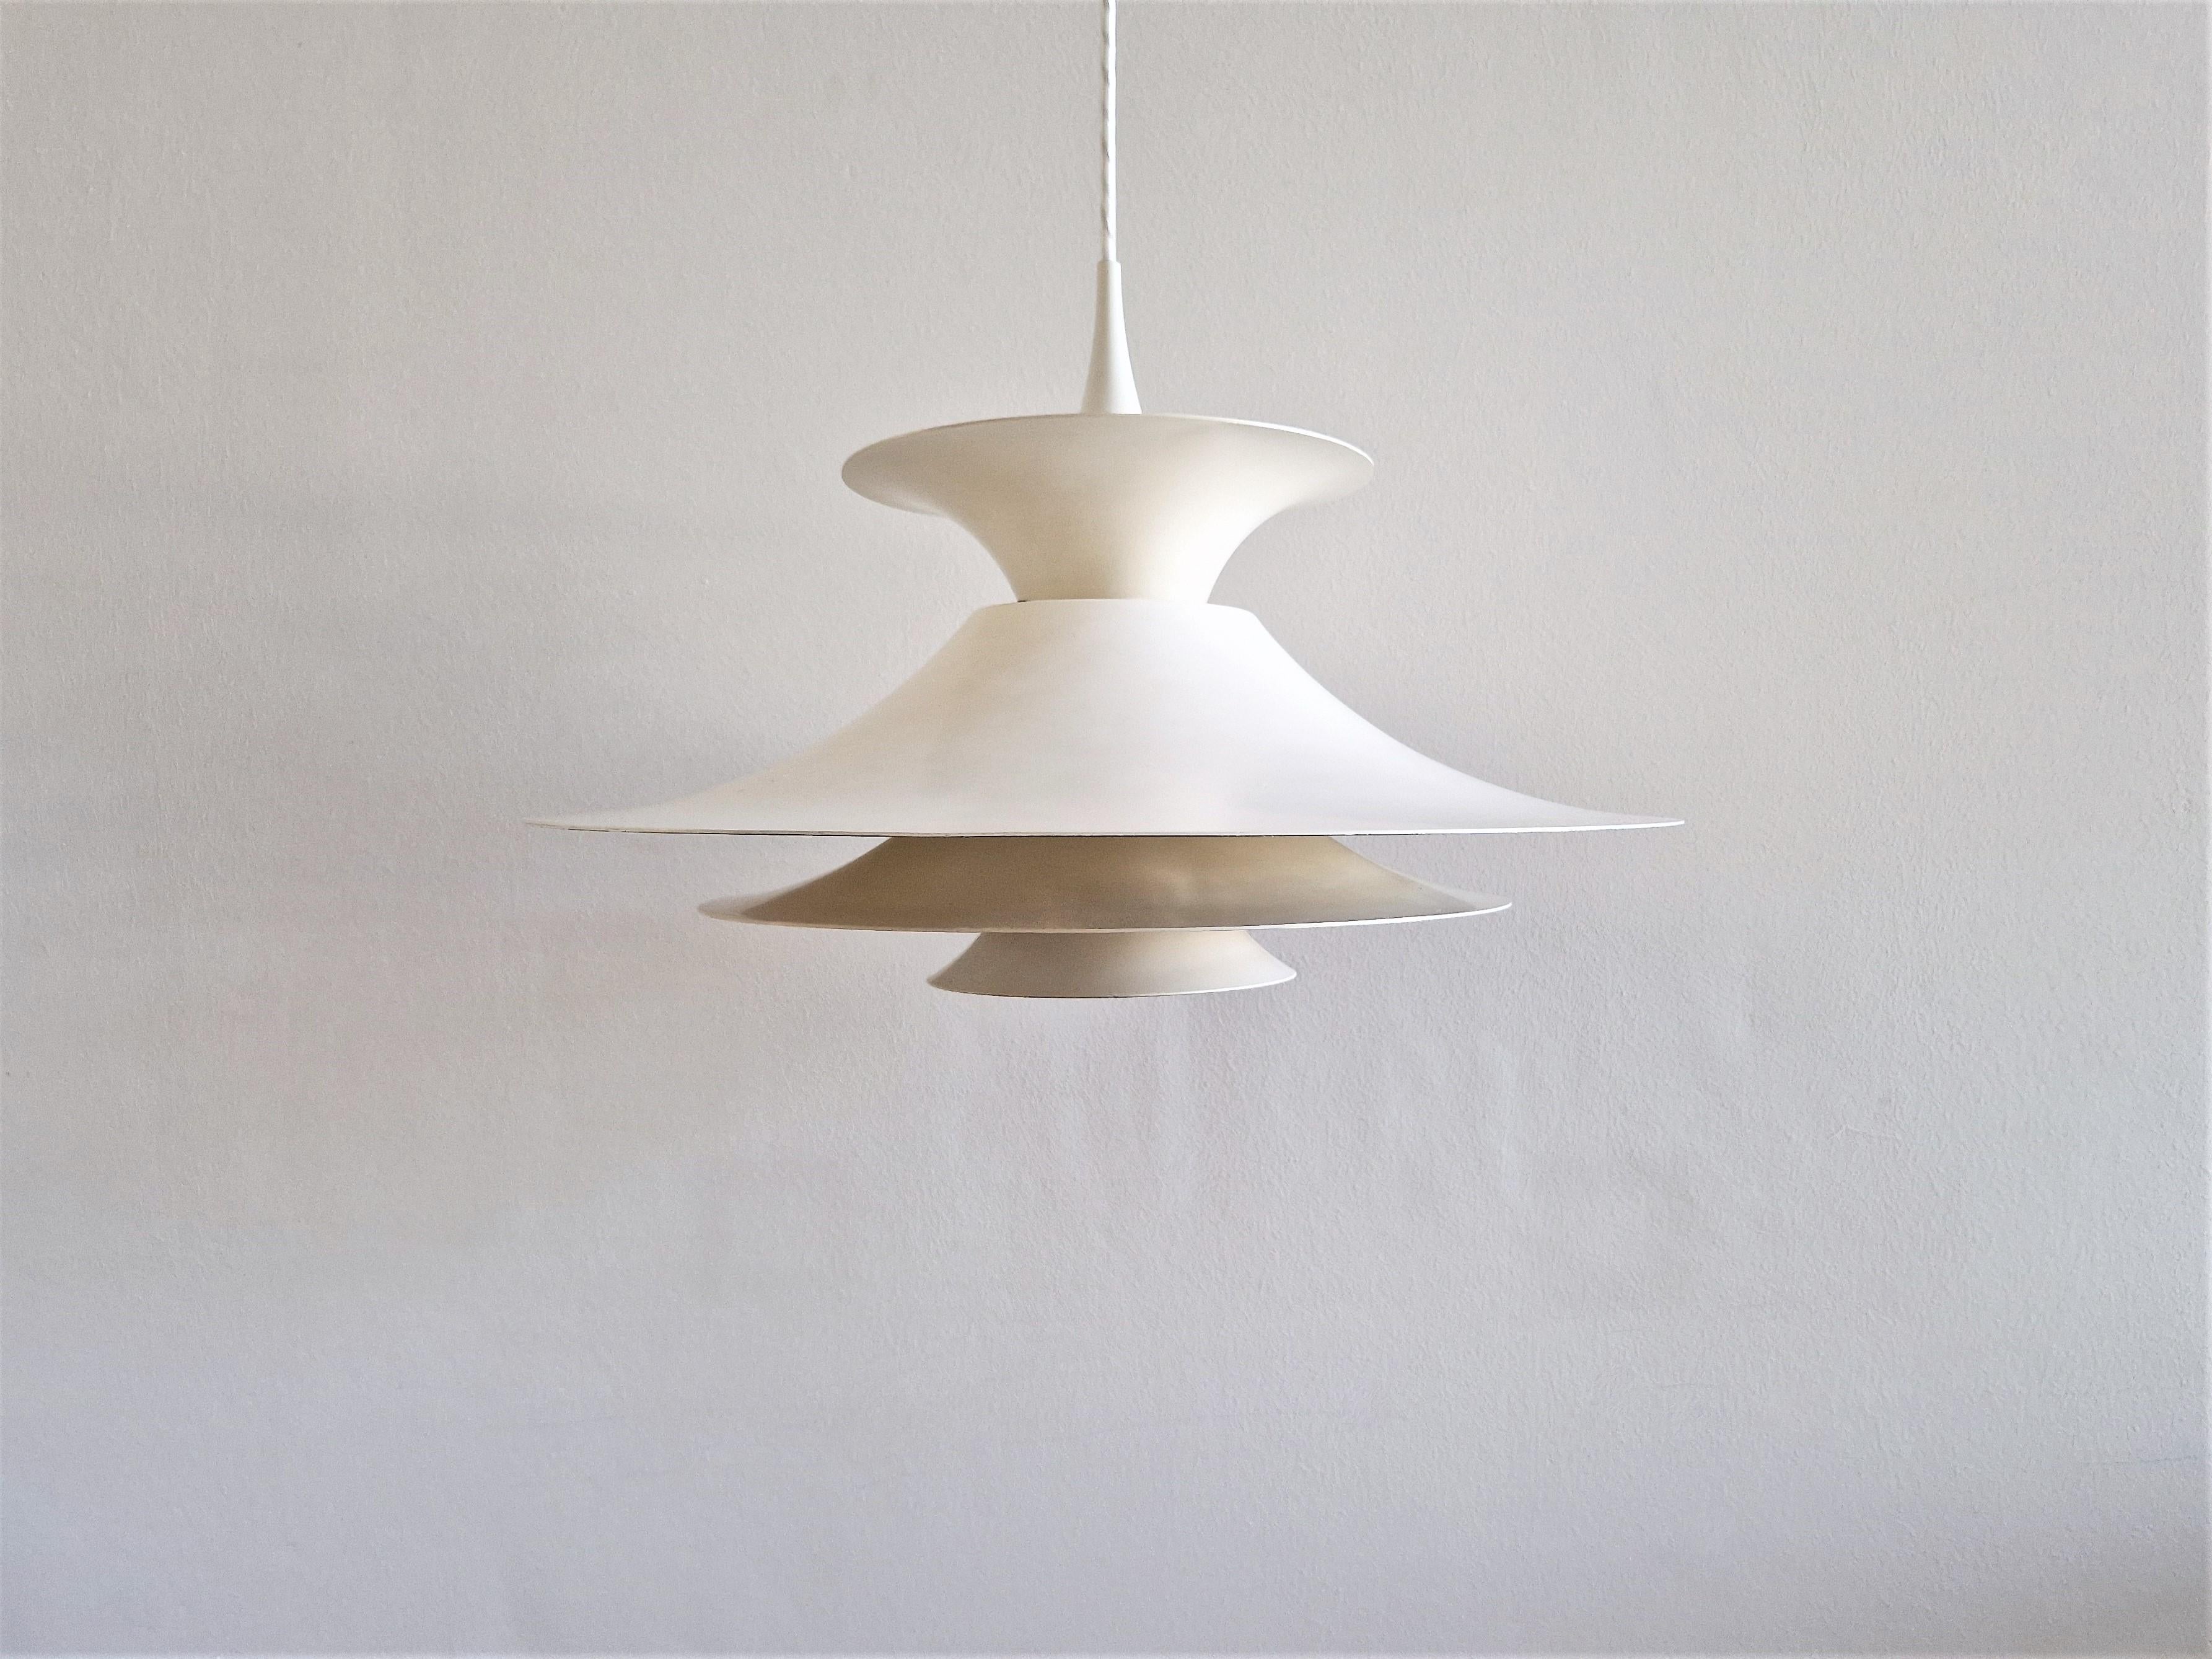 This pendant lamp was designed by Erik Balslev for Fog & Mørup in Denmark in the 1970's. The Radius I is the ø 47 cm version of the Radius lights. The pendant has an overall white color that gives it a modern look. The Radius series are